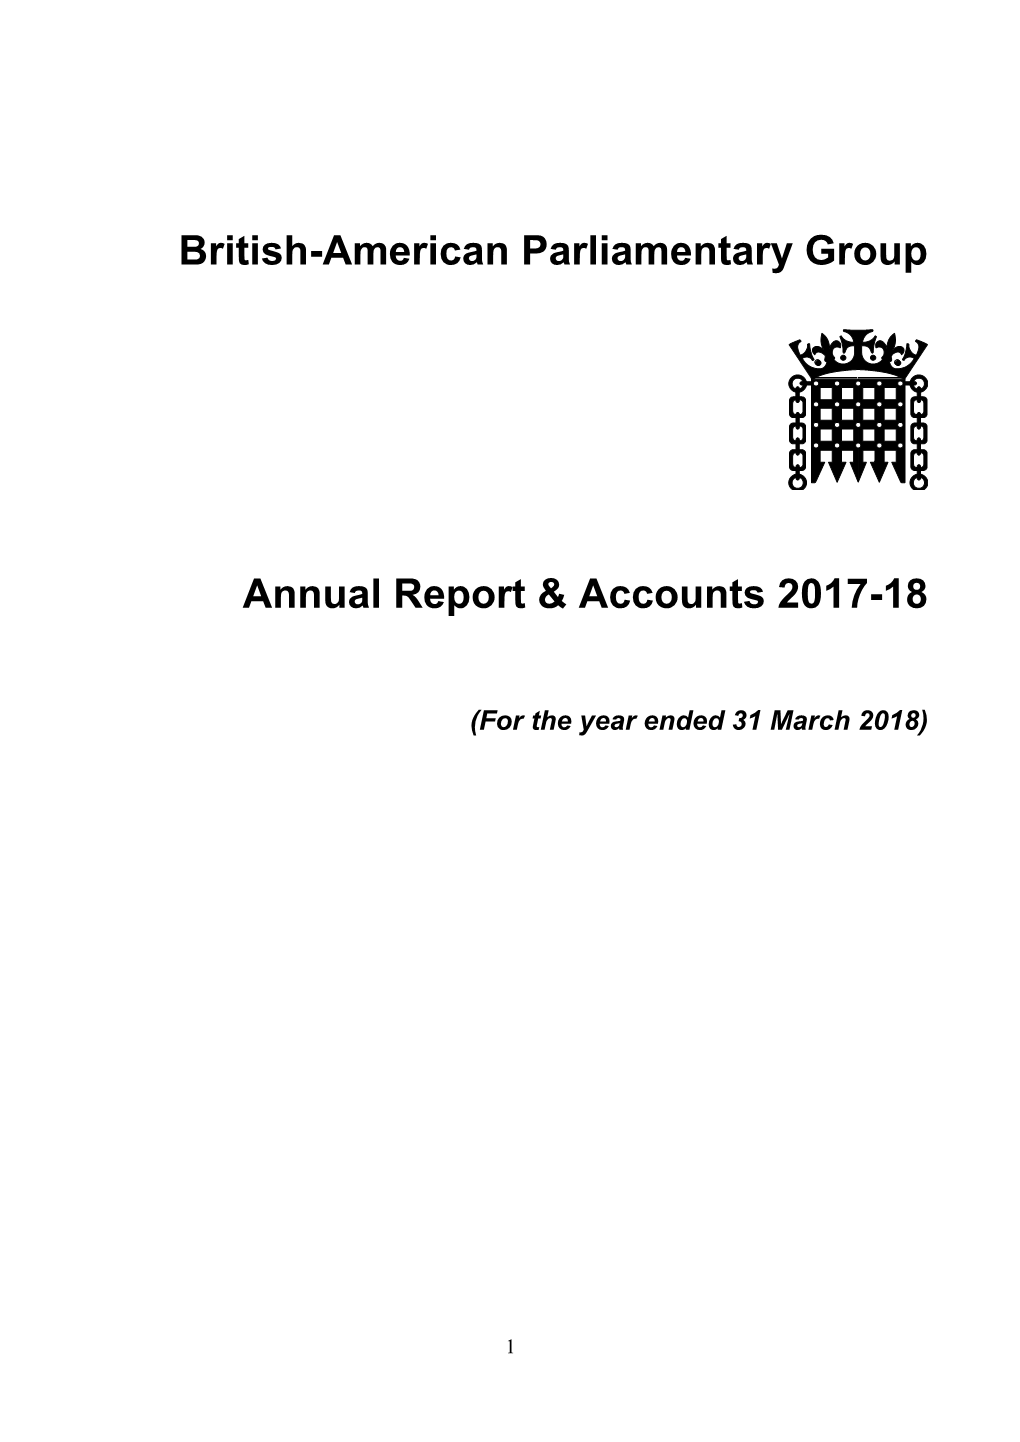 British-American Parliamentary Group Annual Report & Accounts 2017-18